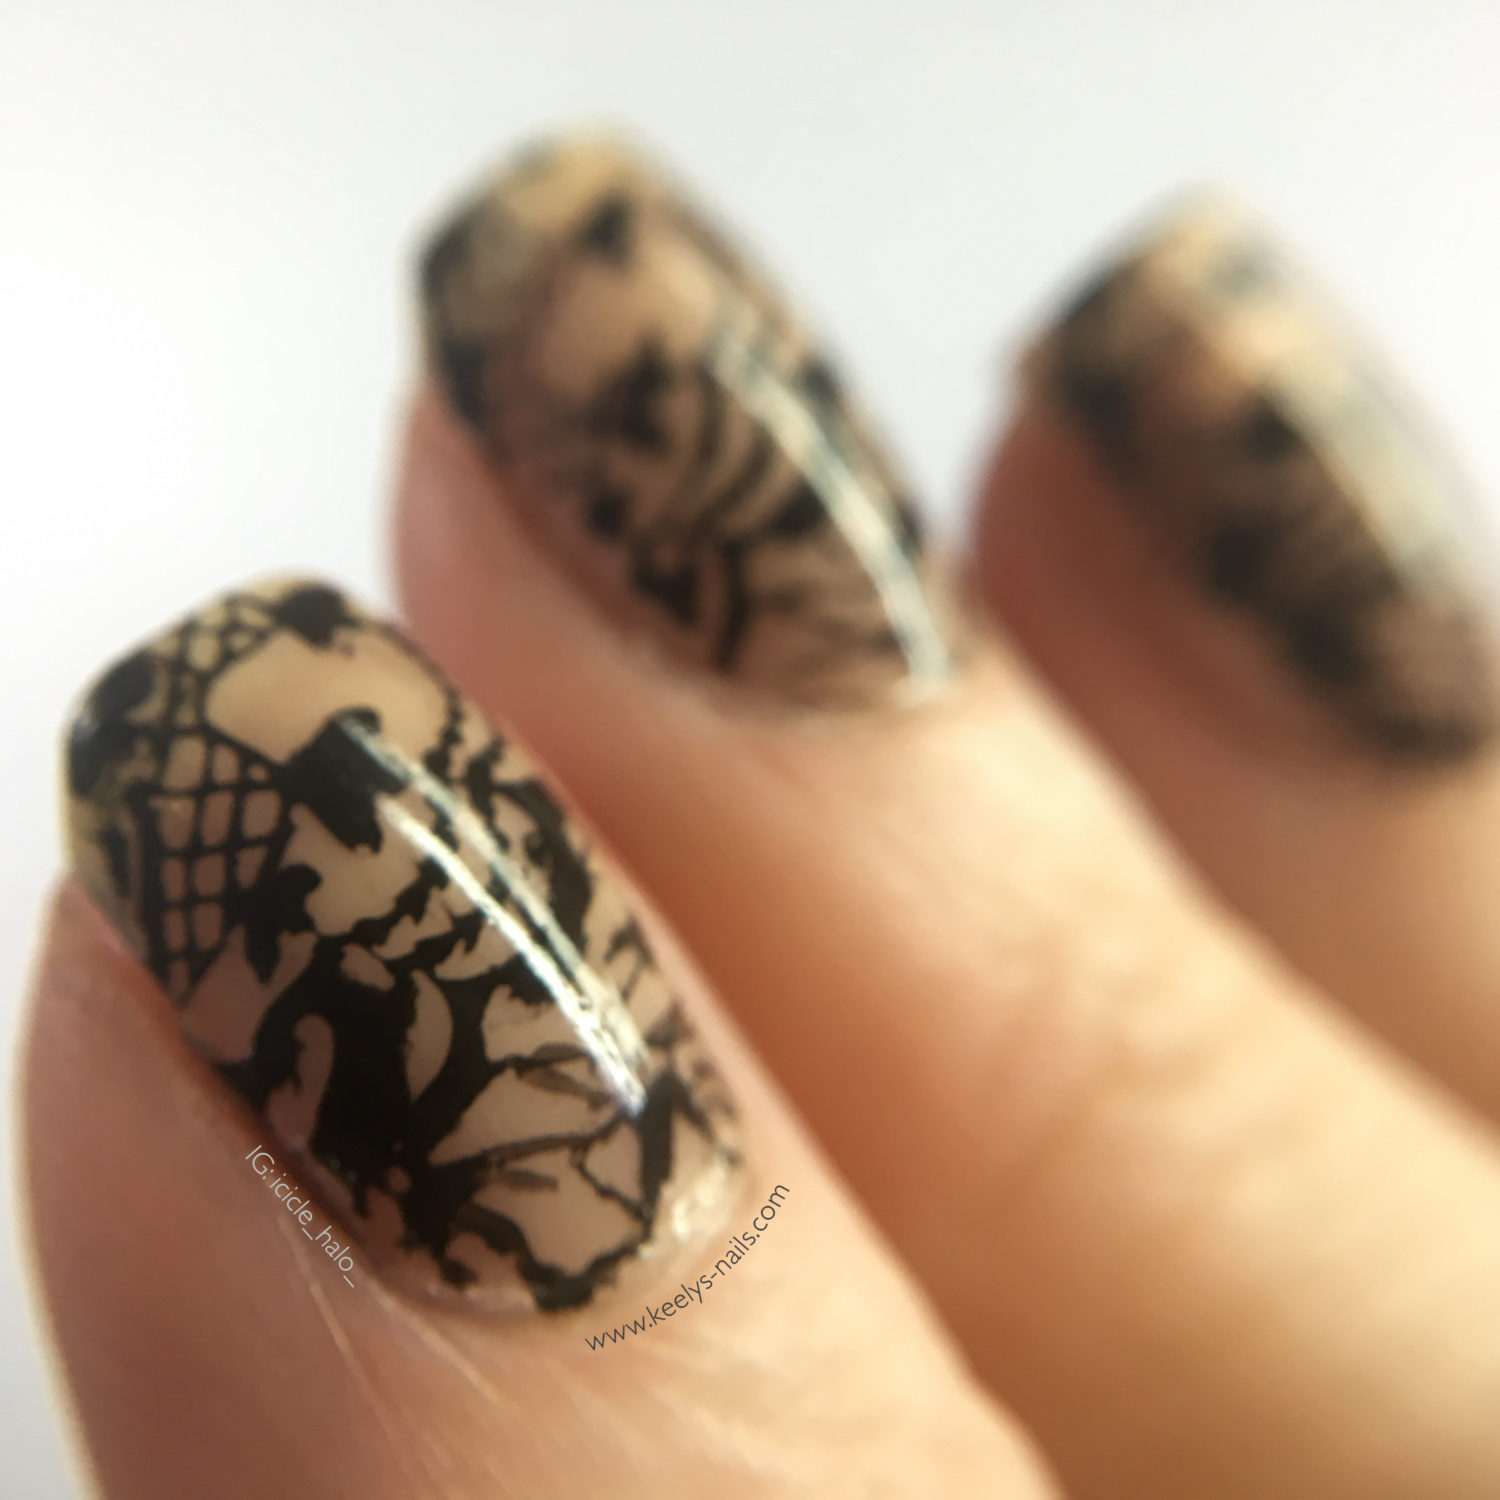 Lace nail art inspired by Wingz